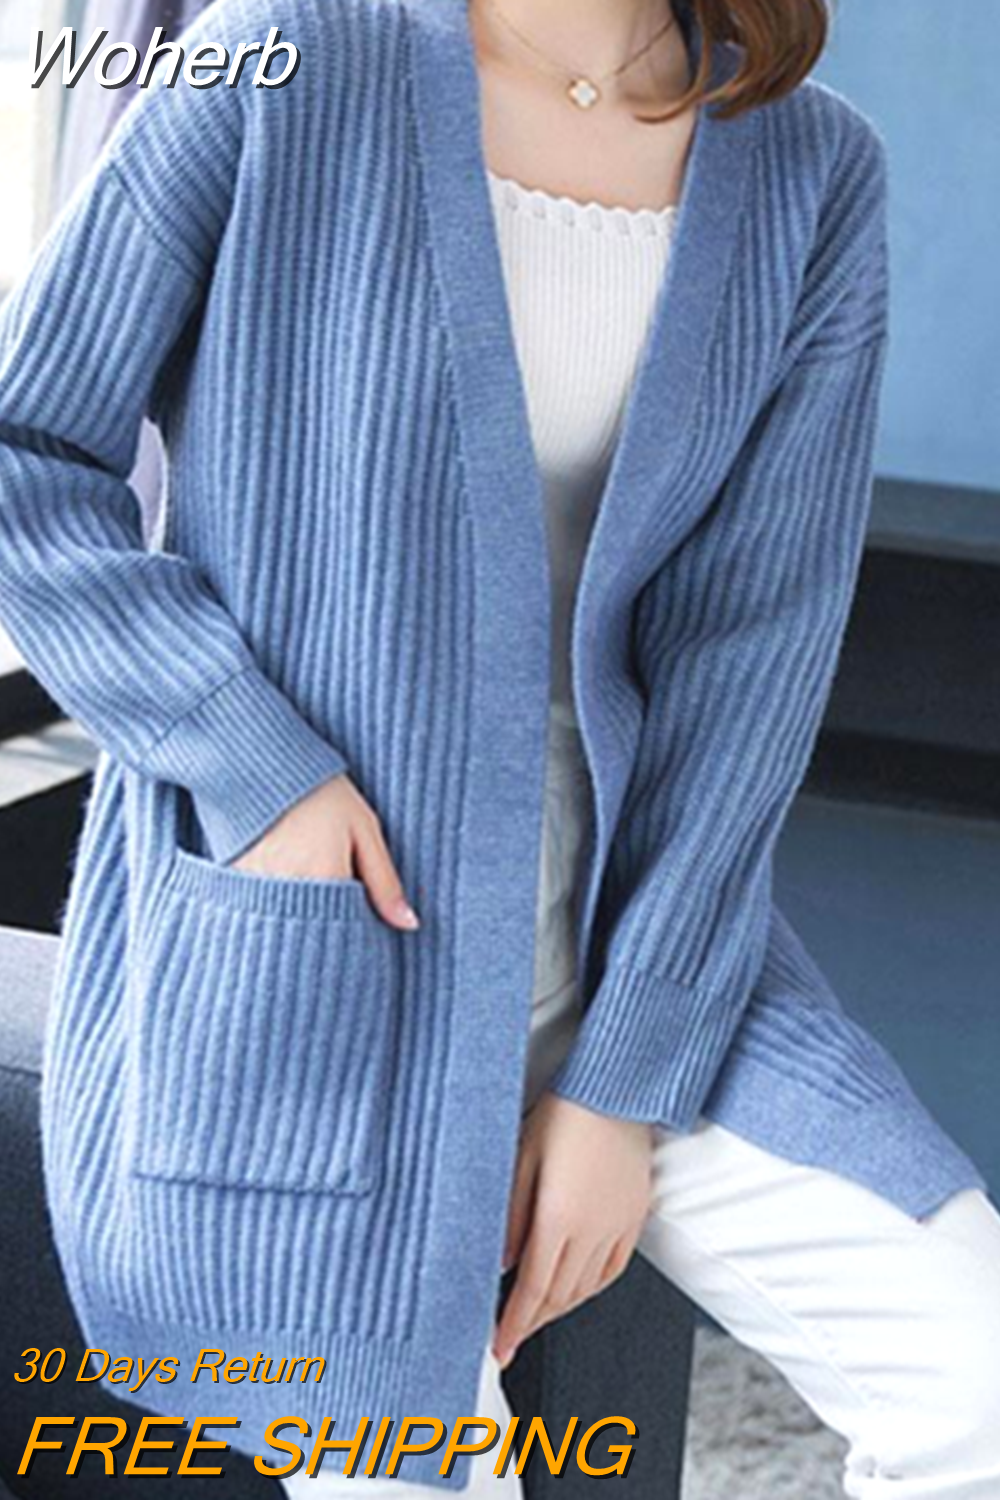 Woherb New Solid Knit Cardigan Long Sleeve Sweater Women Open Stitch Casual Pocket 2023 Loose Medium-long Cardigans Mujer 54687